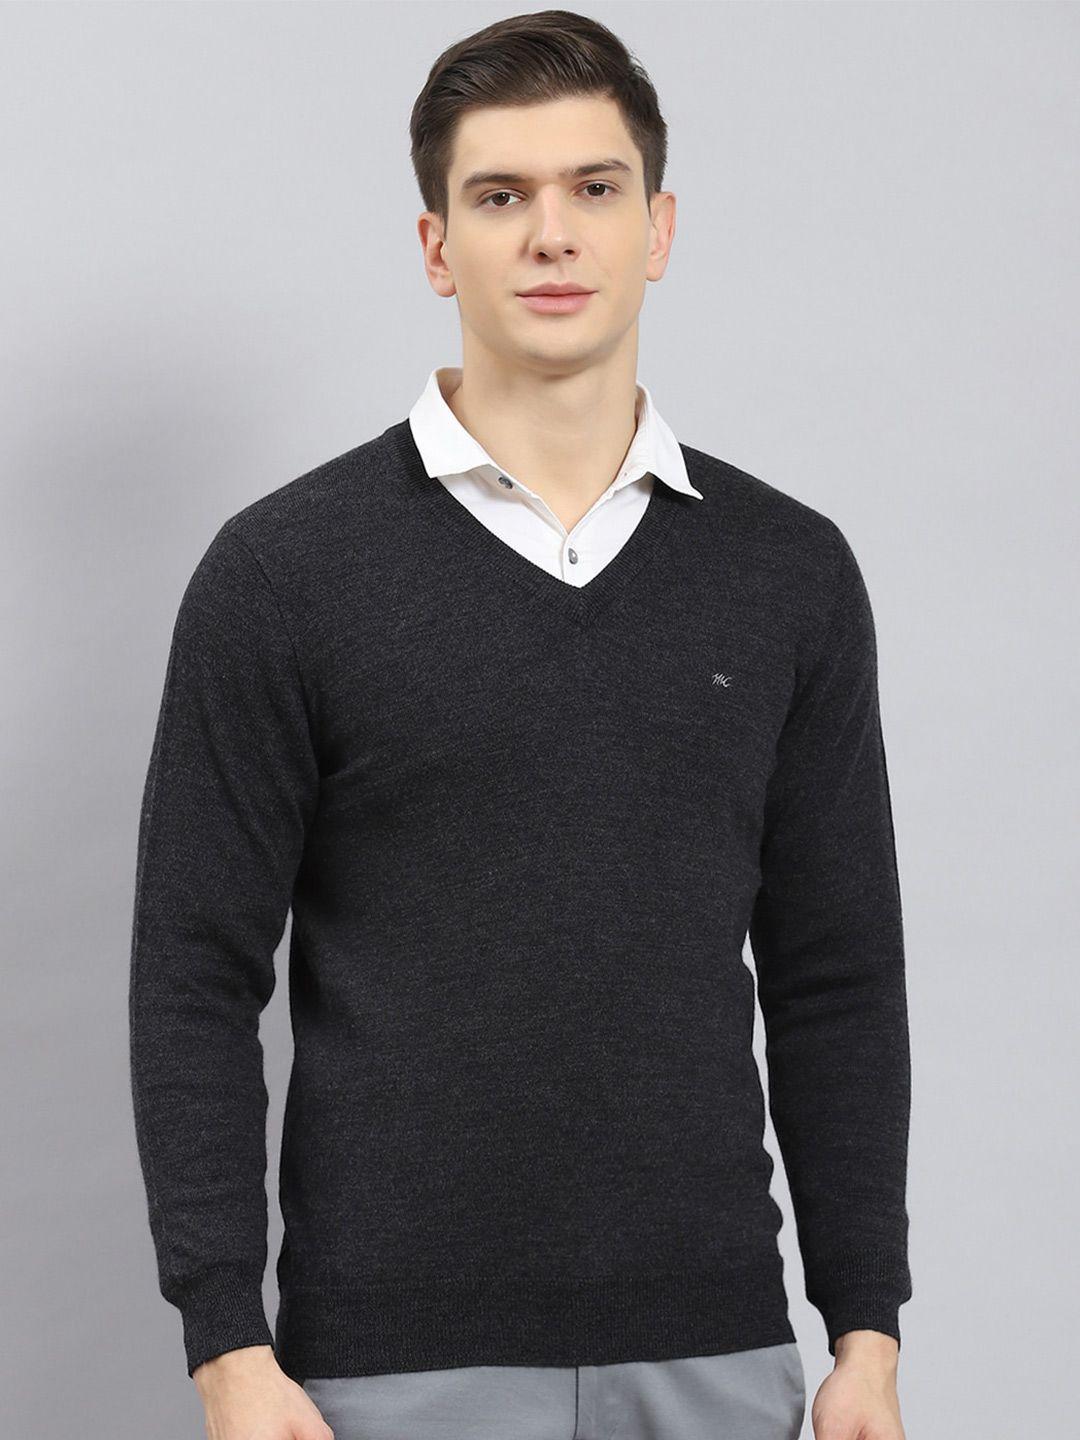 monte-carlo-v-neck-woollen-pullover-ribbed-sweaters